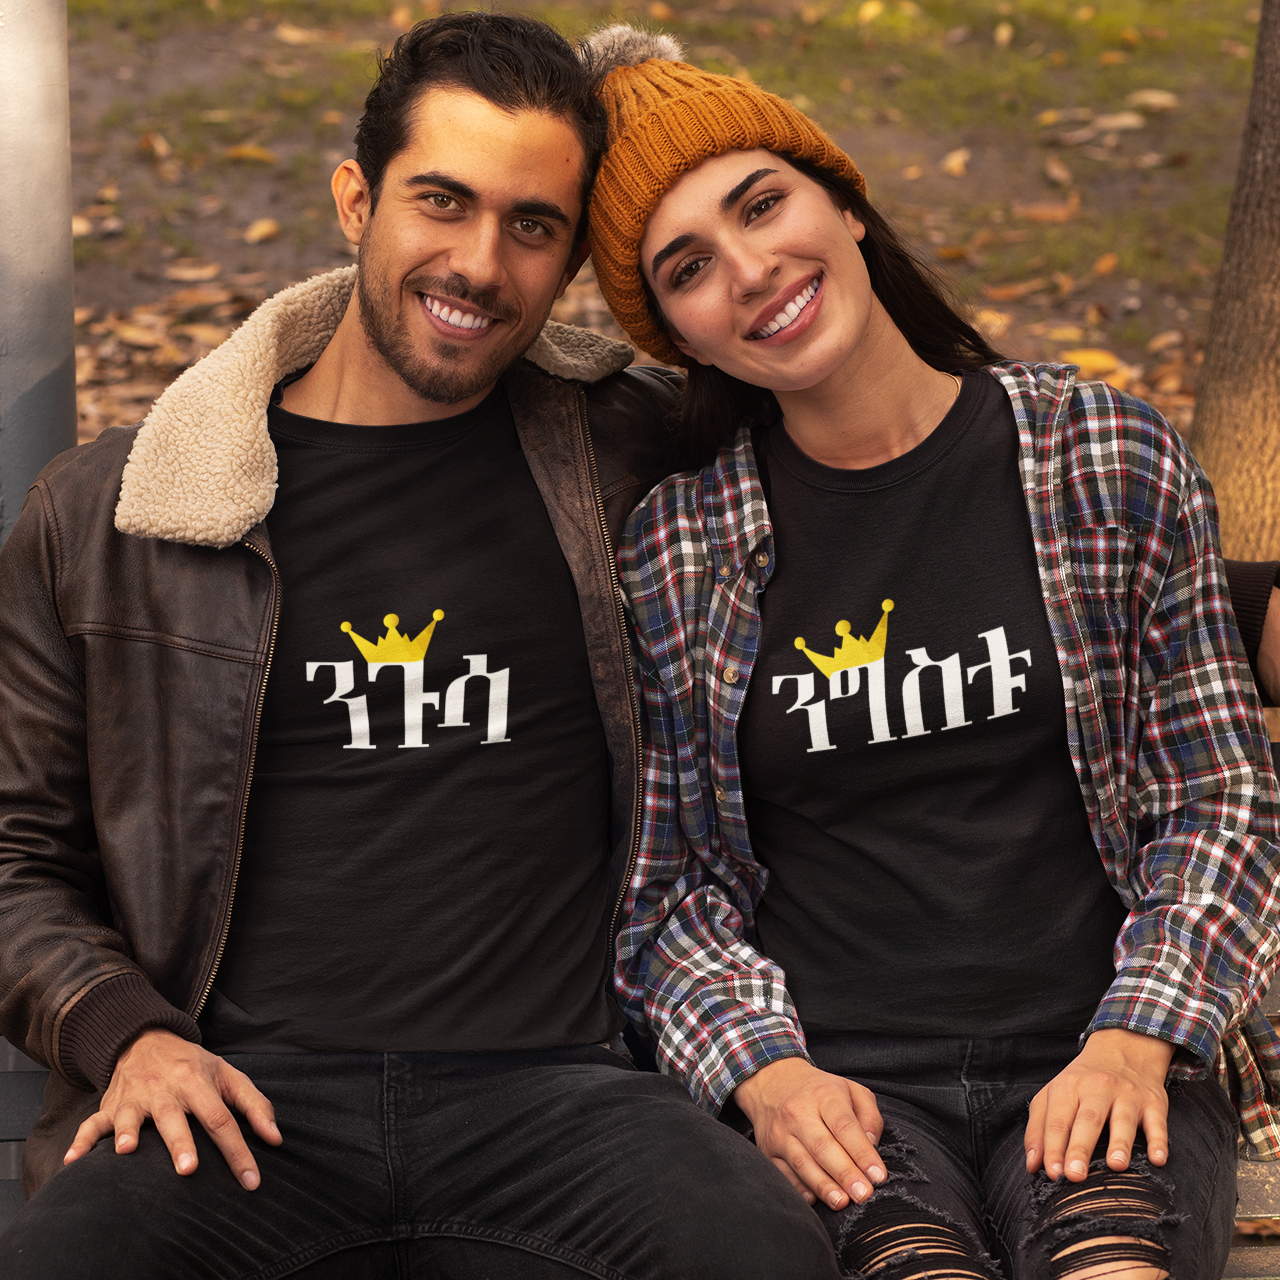 Her King and His Queen - ንጉሳ ንግስቱ Habesha Couples T-Shirt